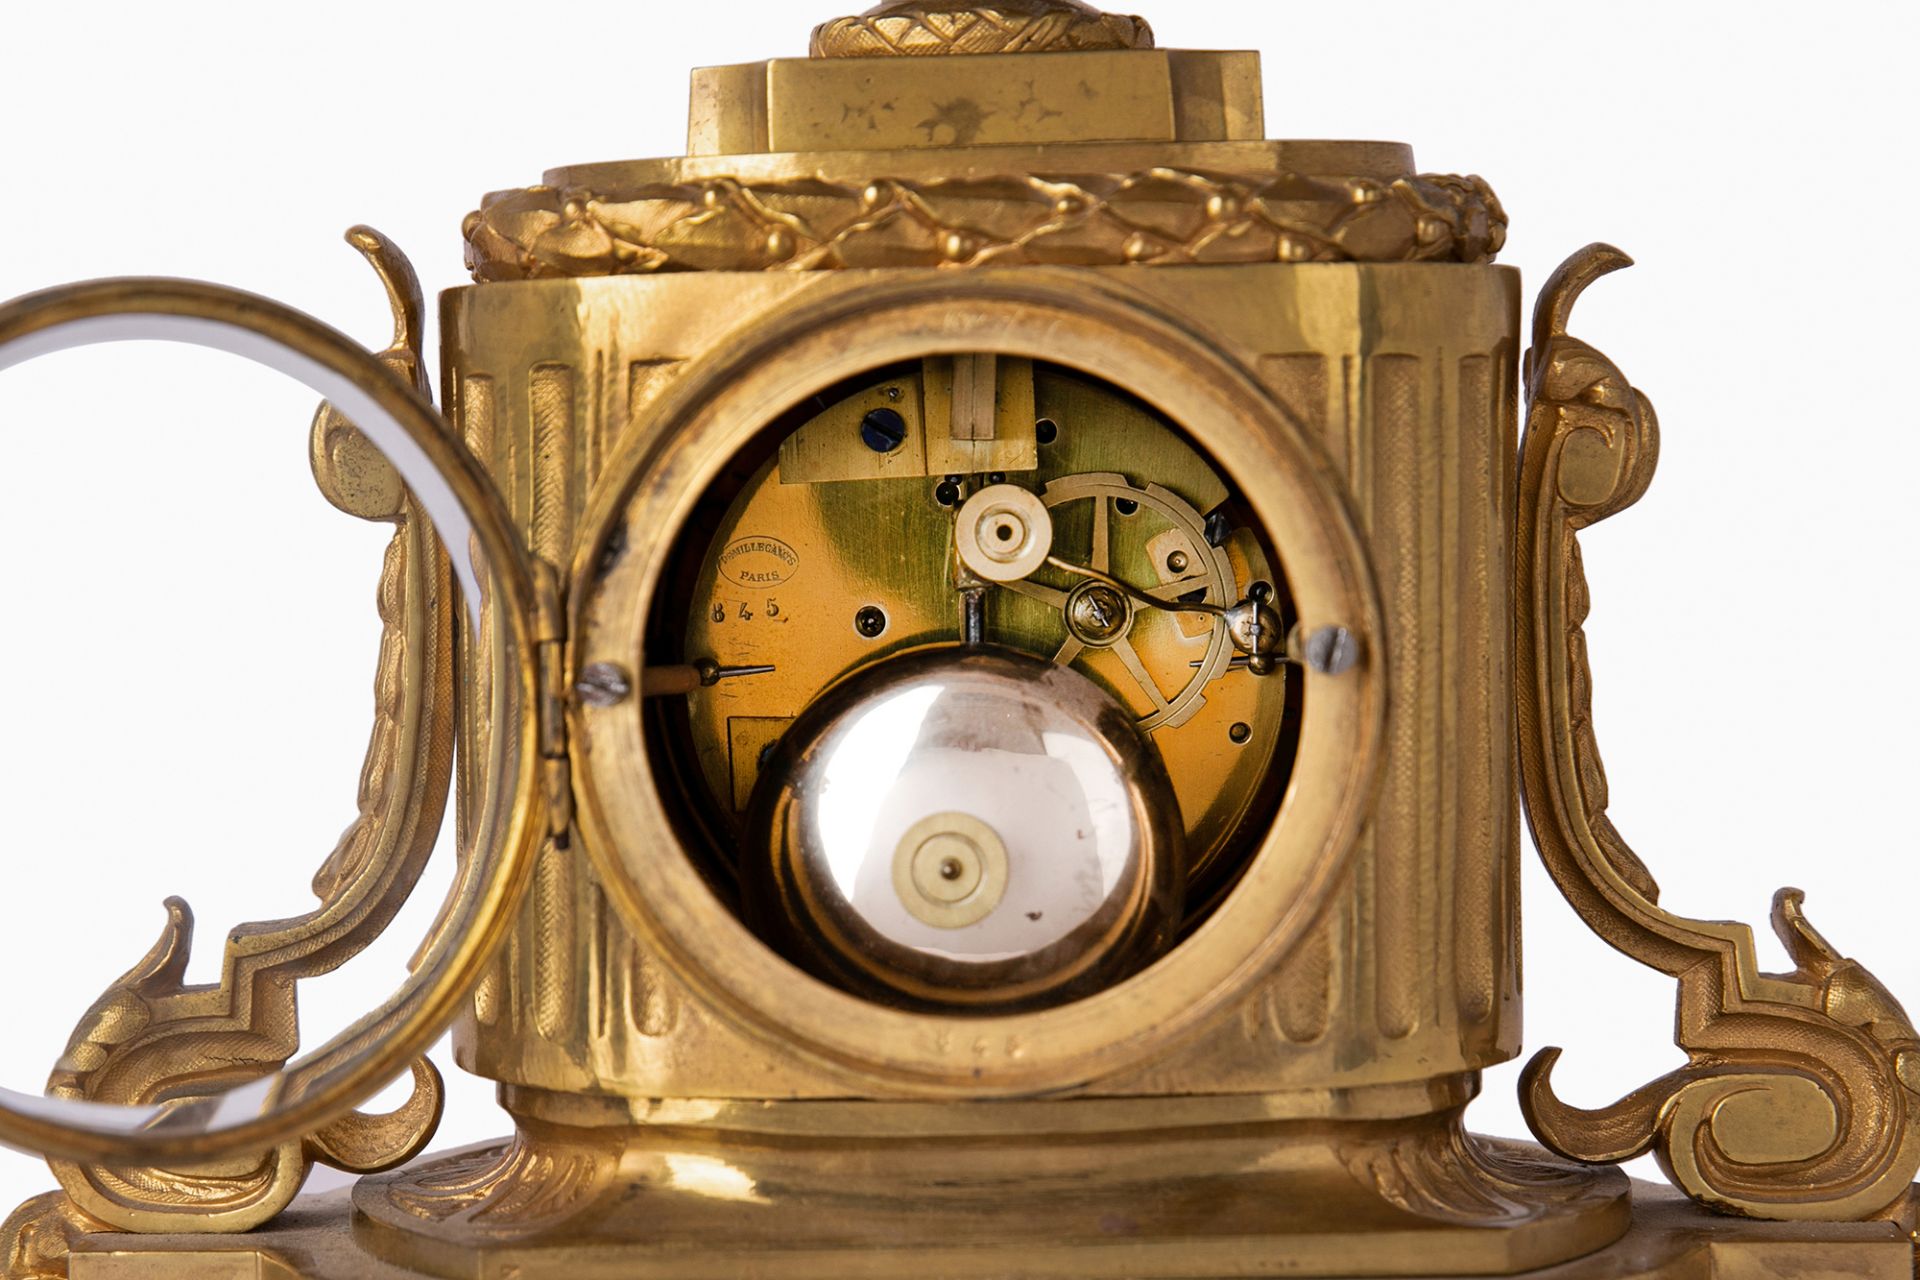 A French gilt-bronze mantel clock, mid-19th century, the case with truncated column flanked by sc... - Image 4 of 4